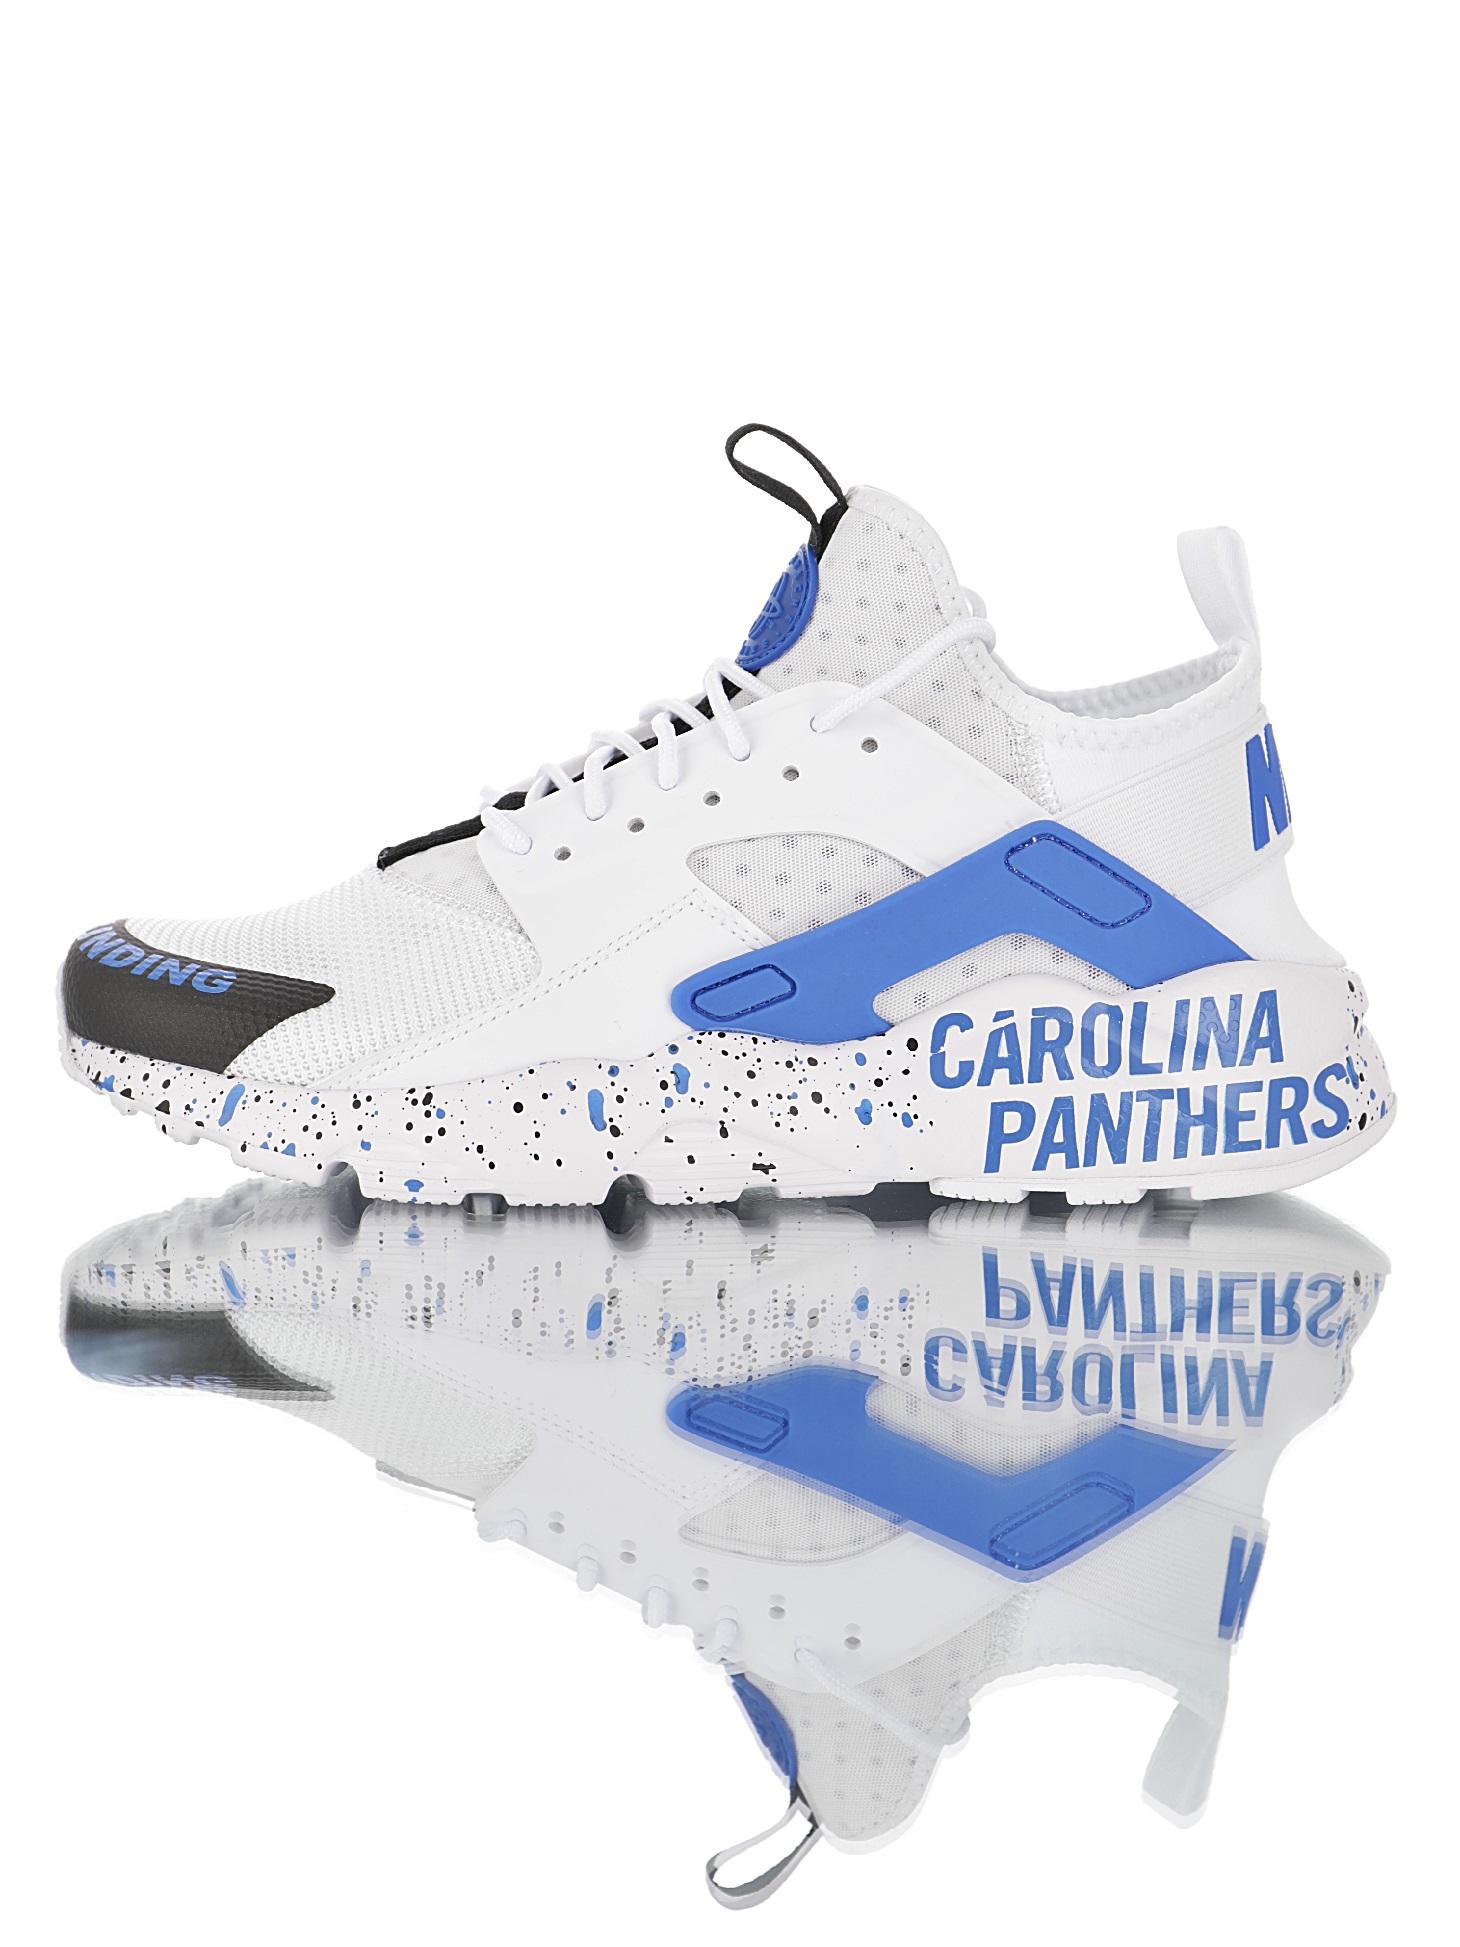 carolina panthers shoes for sale